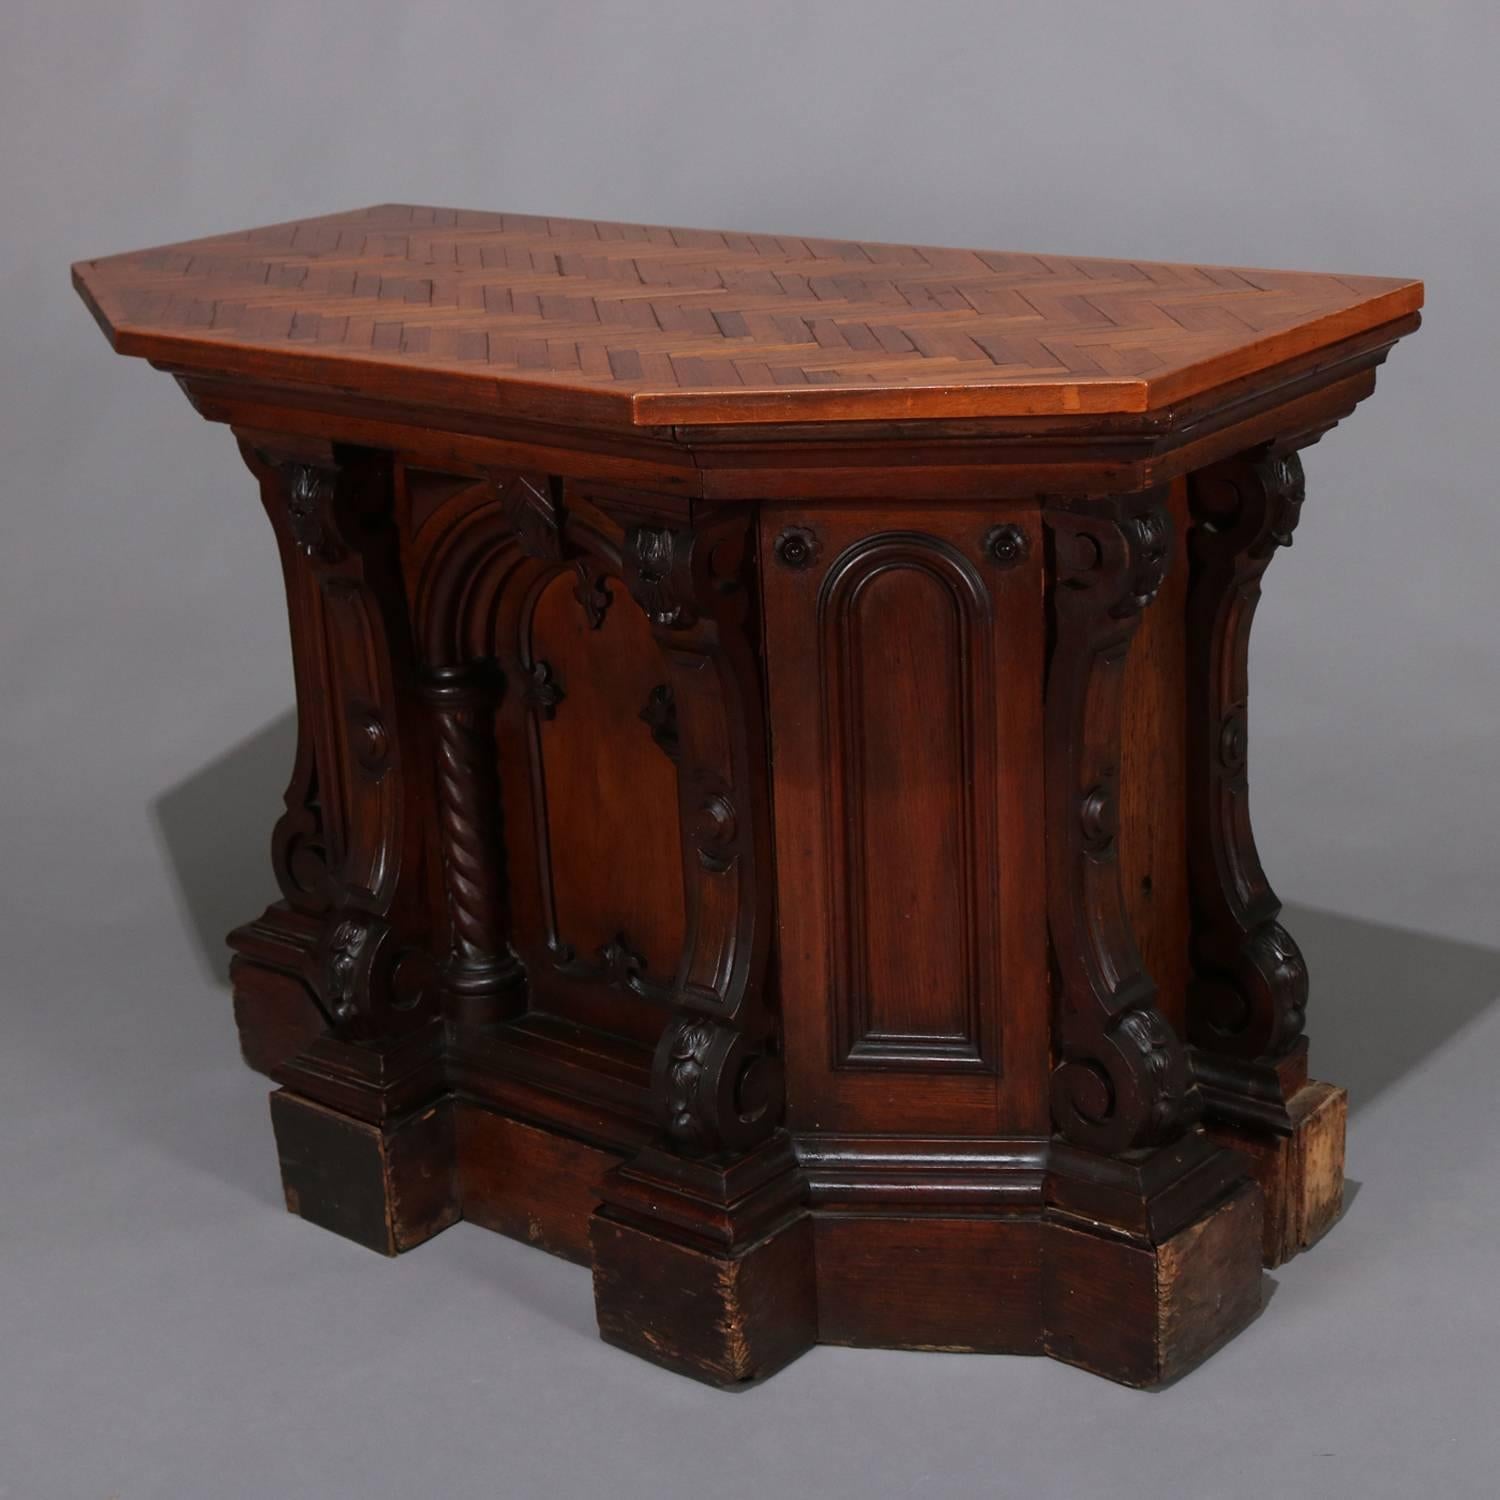 Gothic Renaissance Revival mahogany and walnut presentation podium features parquetry top over base with central Gothic arch flanked by barley twist columns and carved support columns with burl insets, back is open with shelving, circa